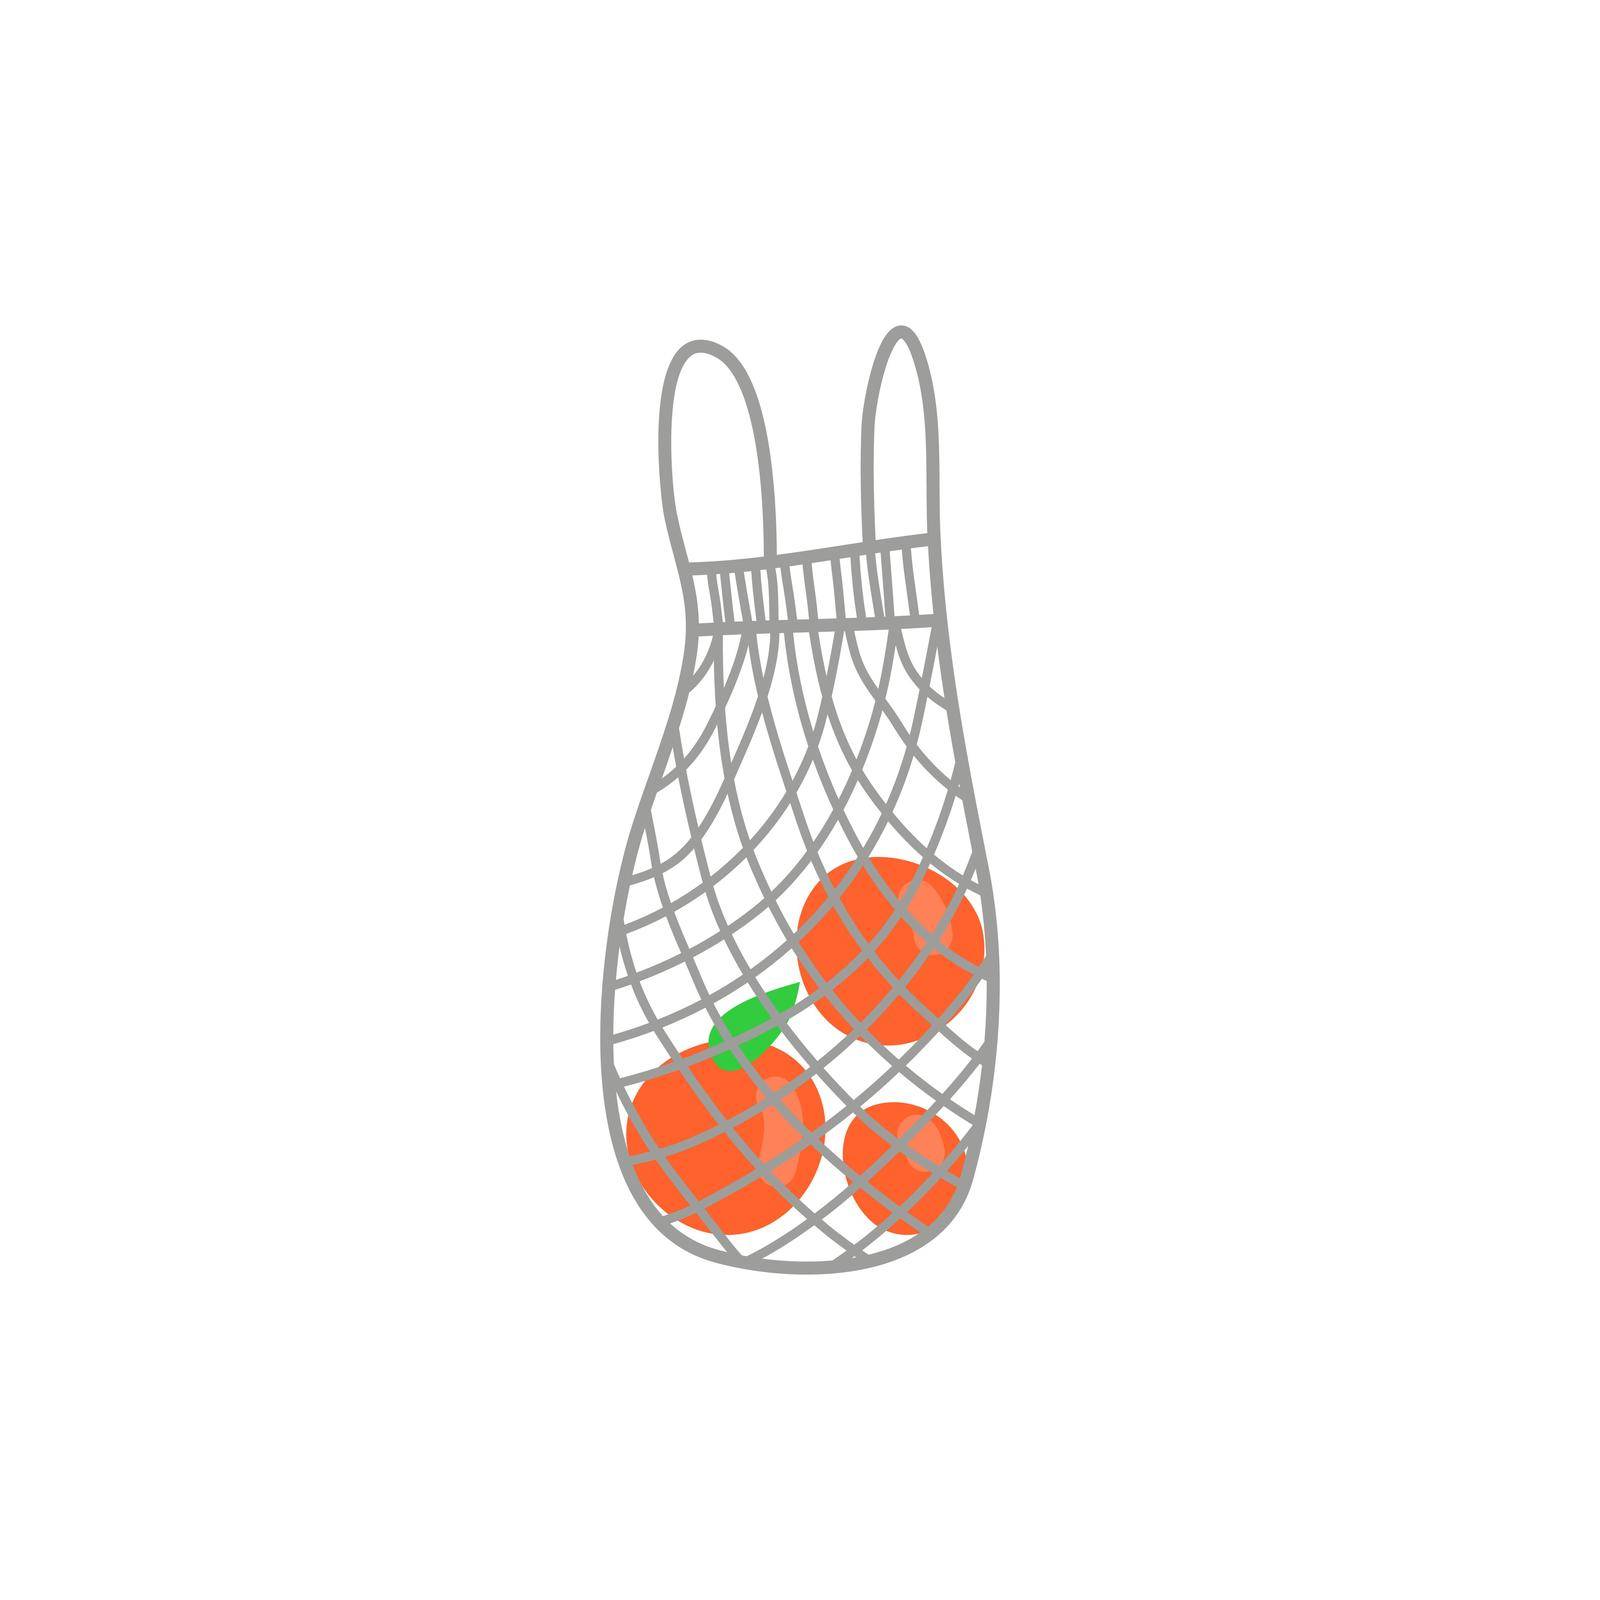 Doodle string bag with fruits. by Minur